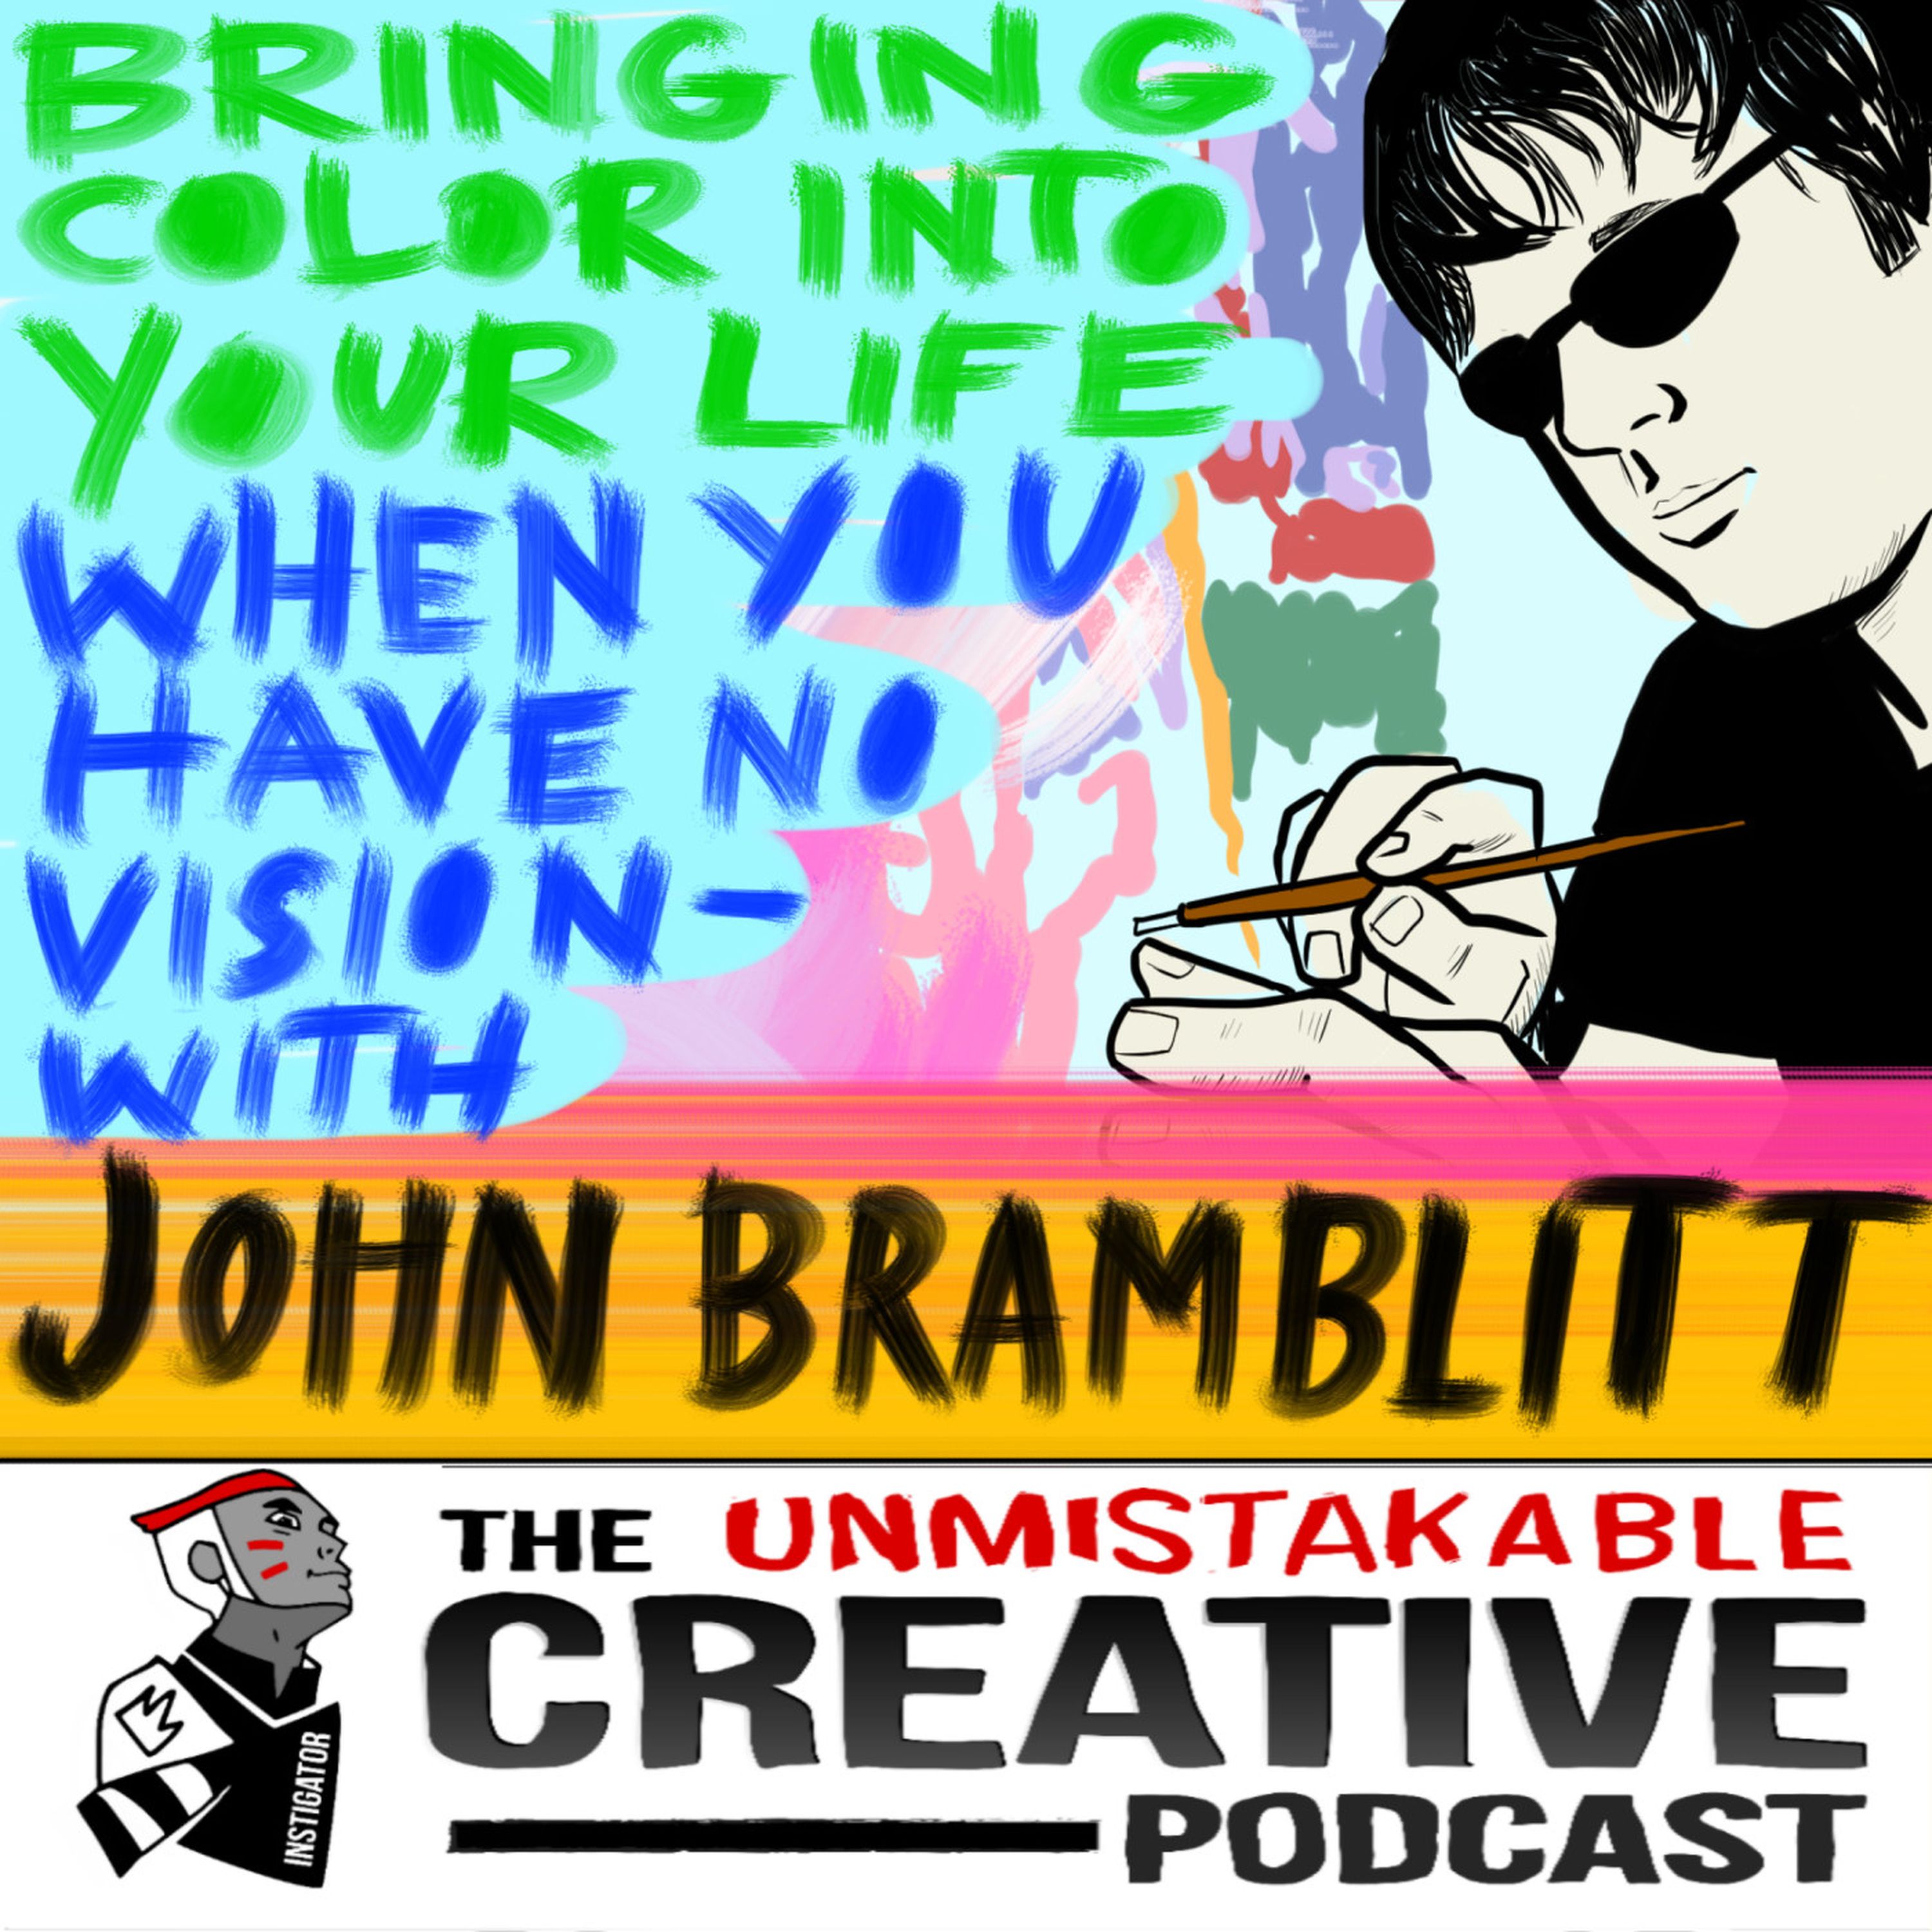 Bringing Color Into Your Life When You Have No Vision with John Bramblitt